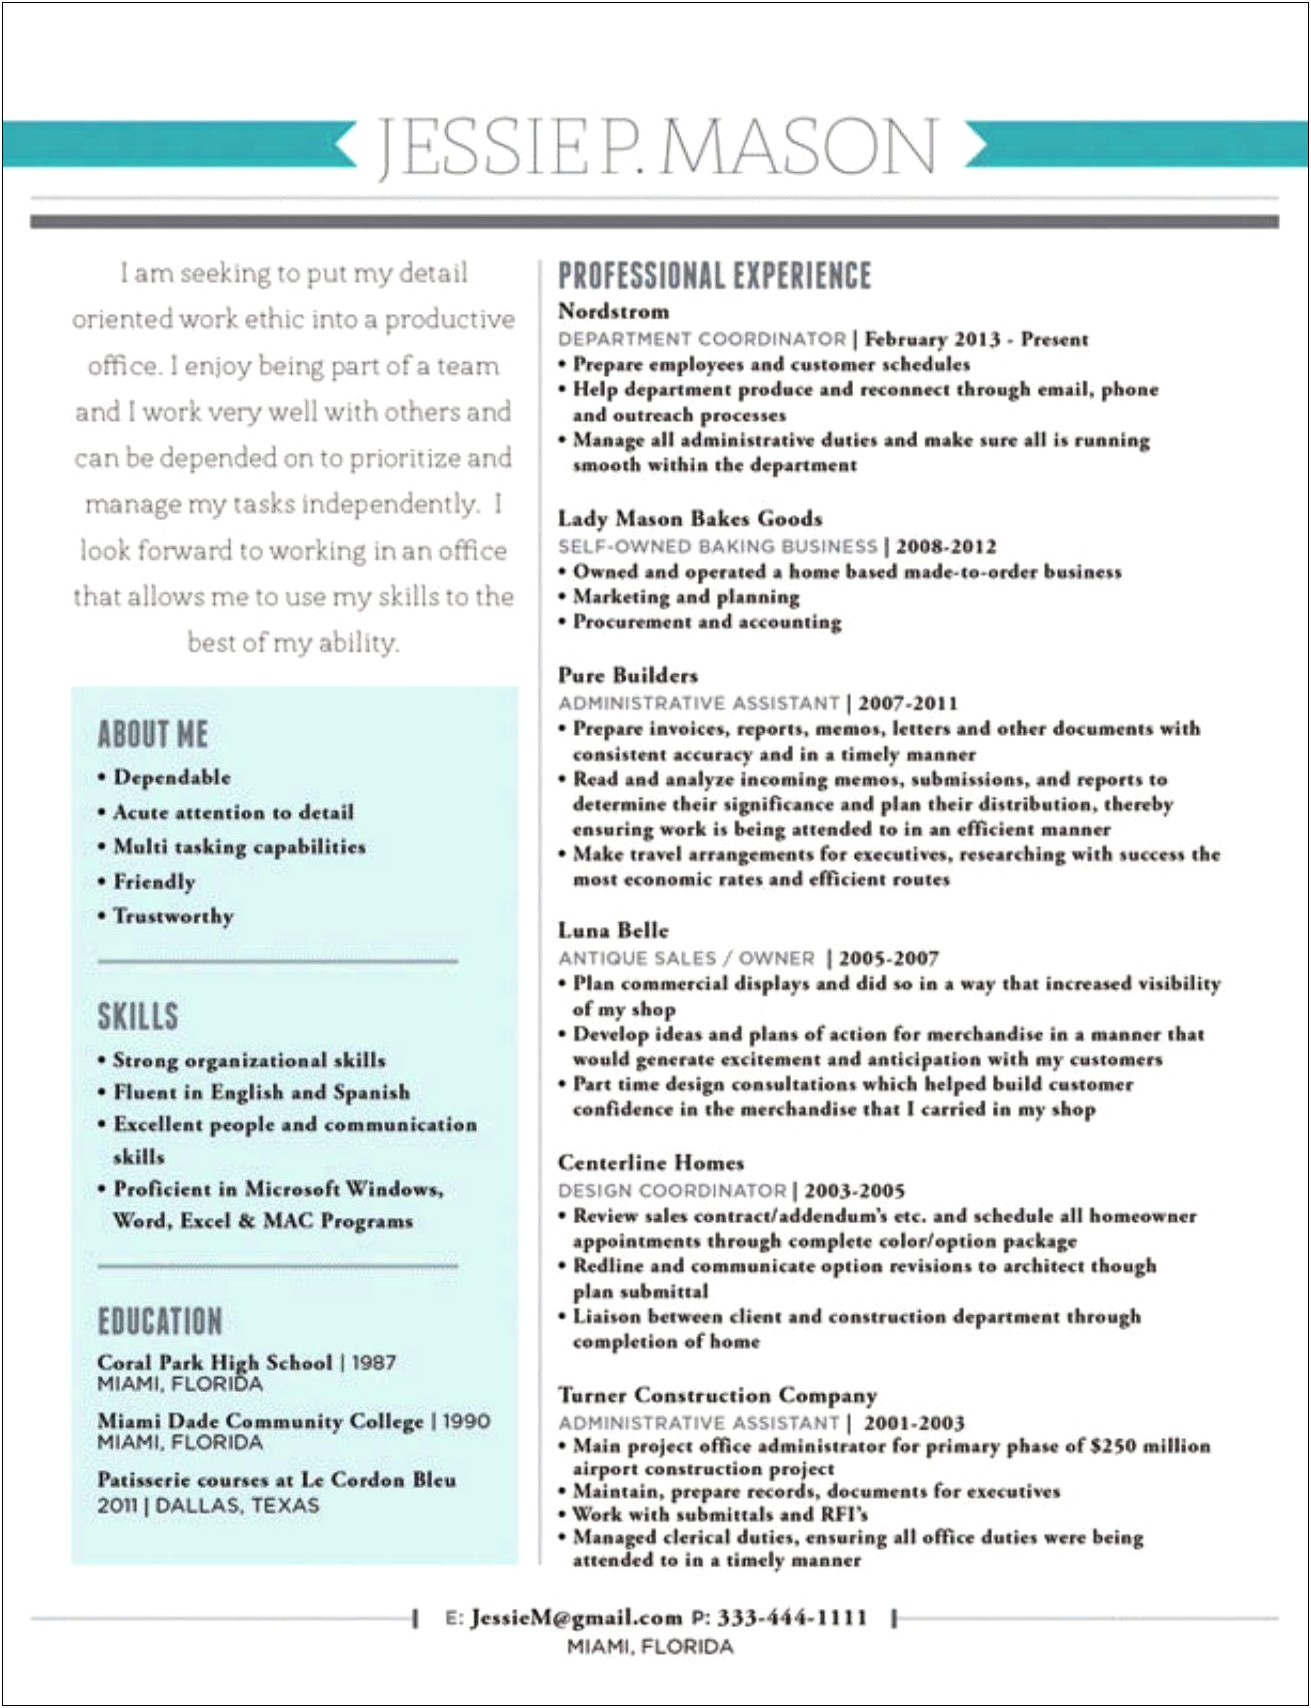 Examples Of Values For A Resume